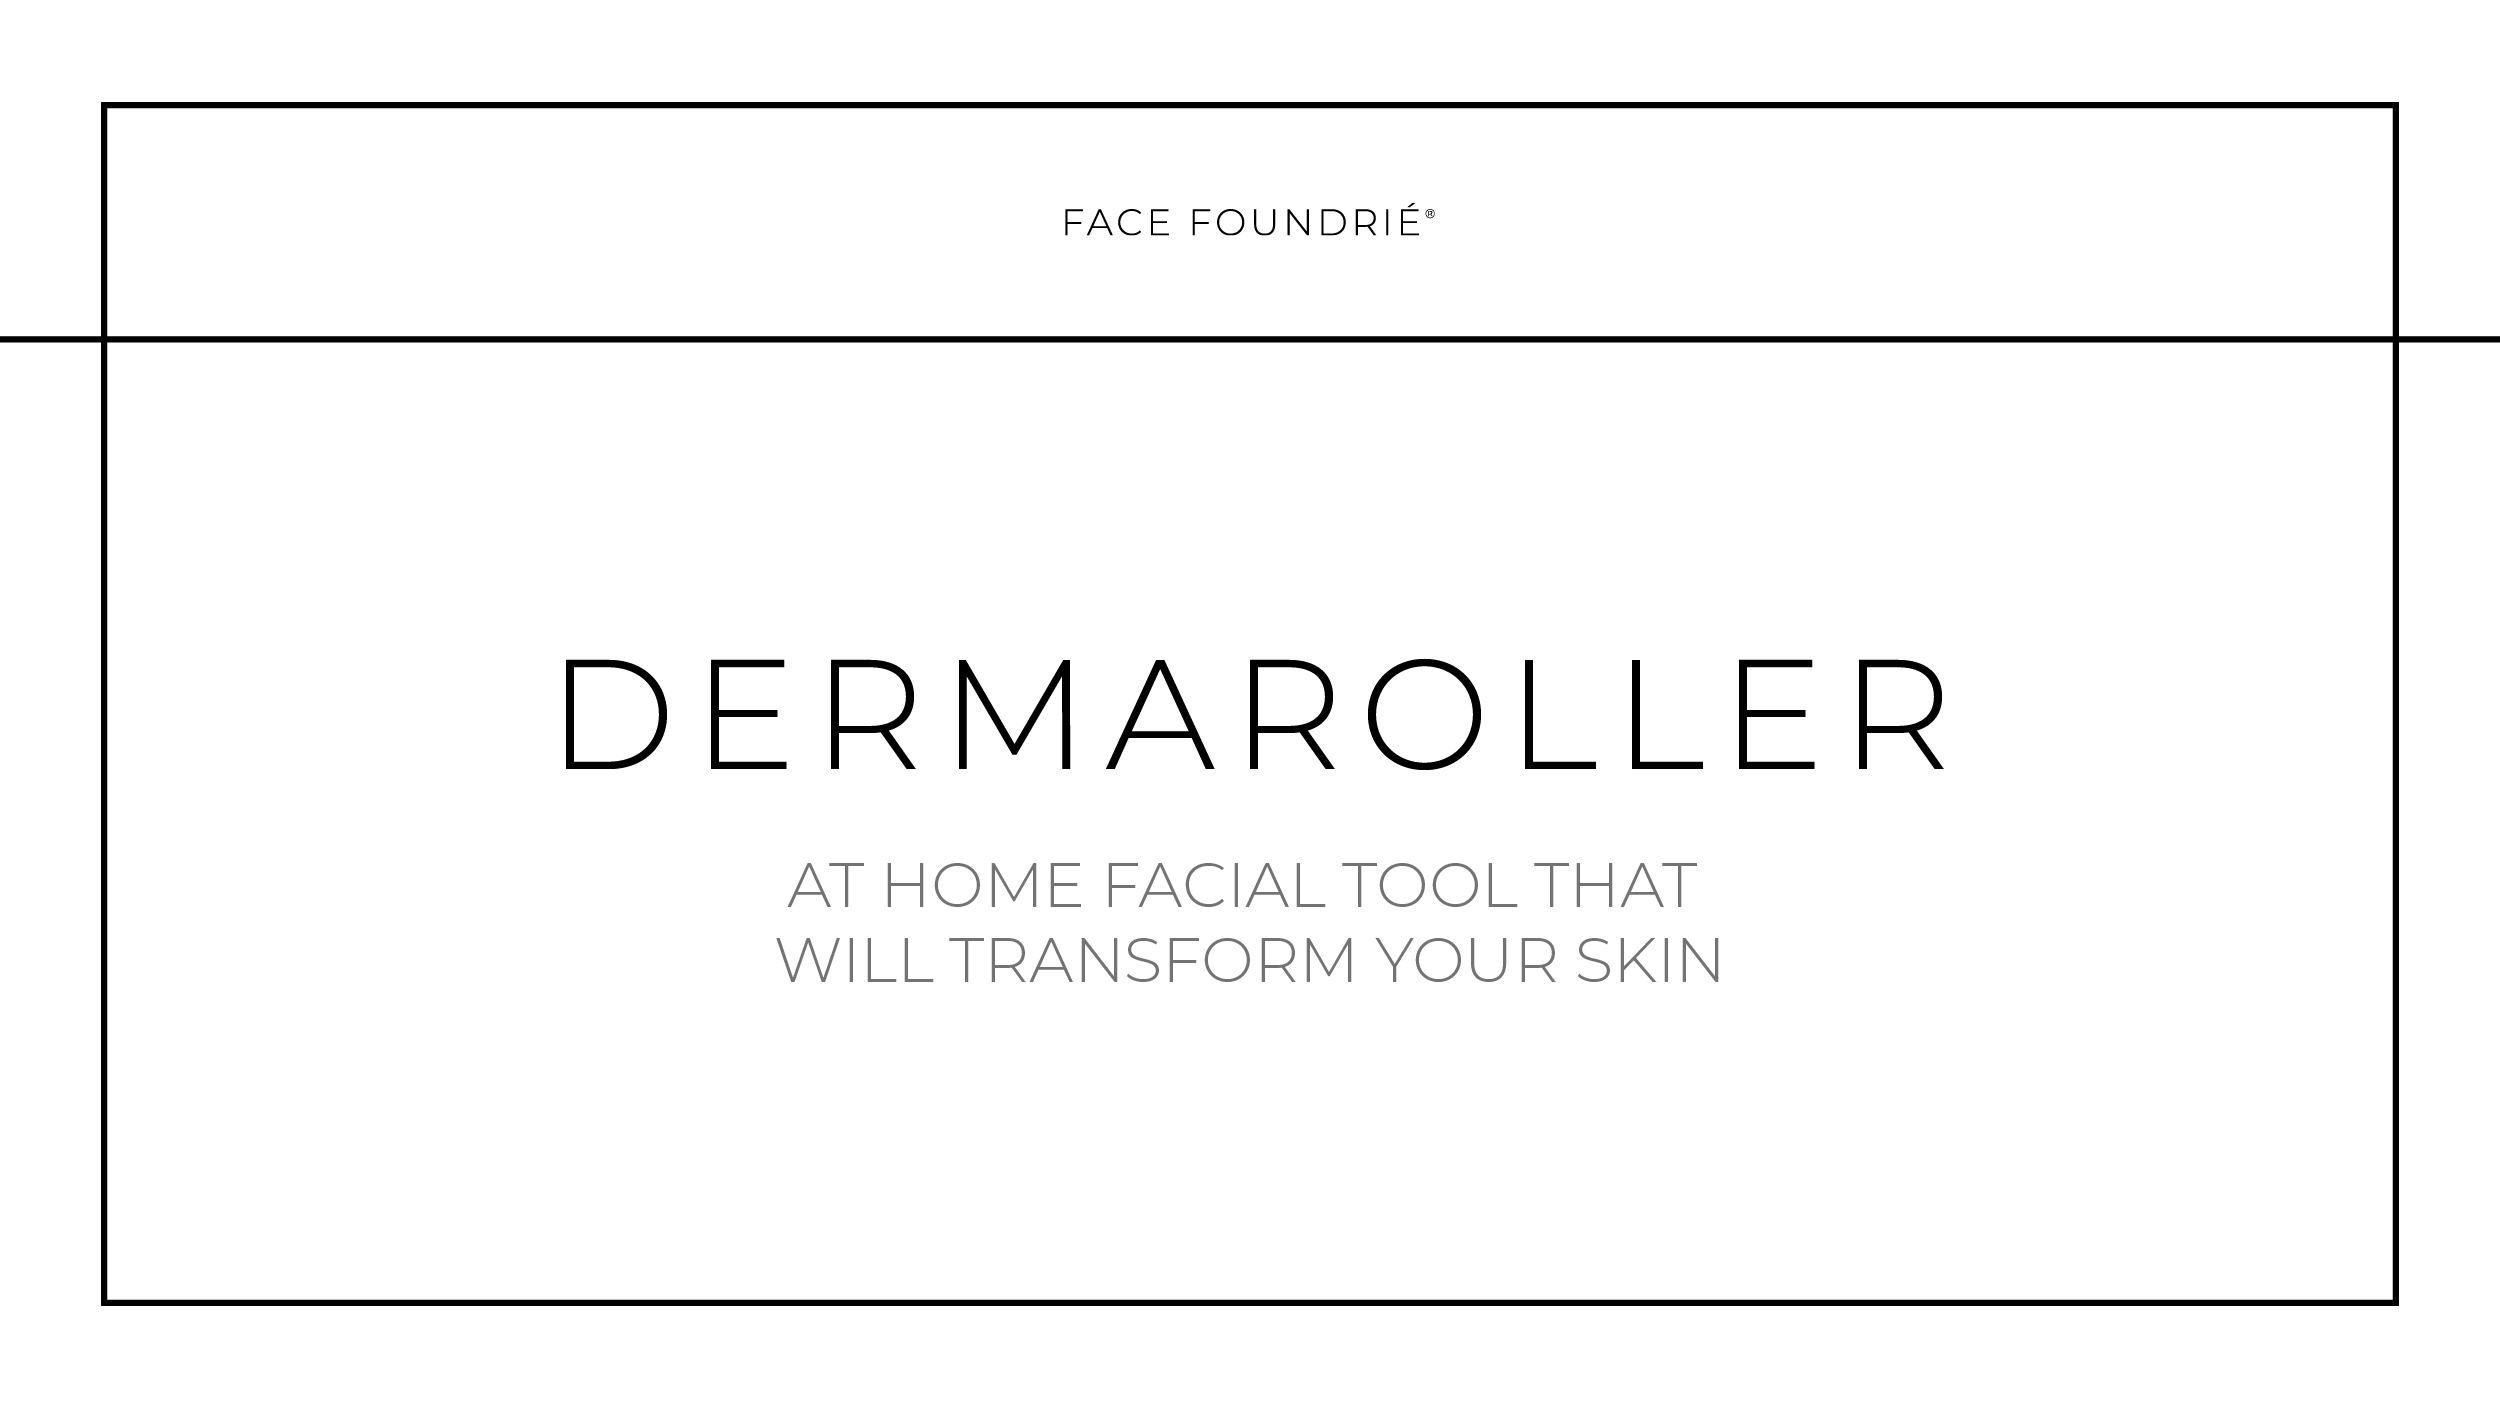 Dermaroller – At Home Facial Tool That Will Transform Your Skin